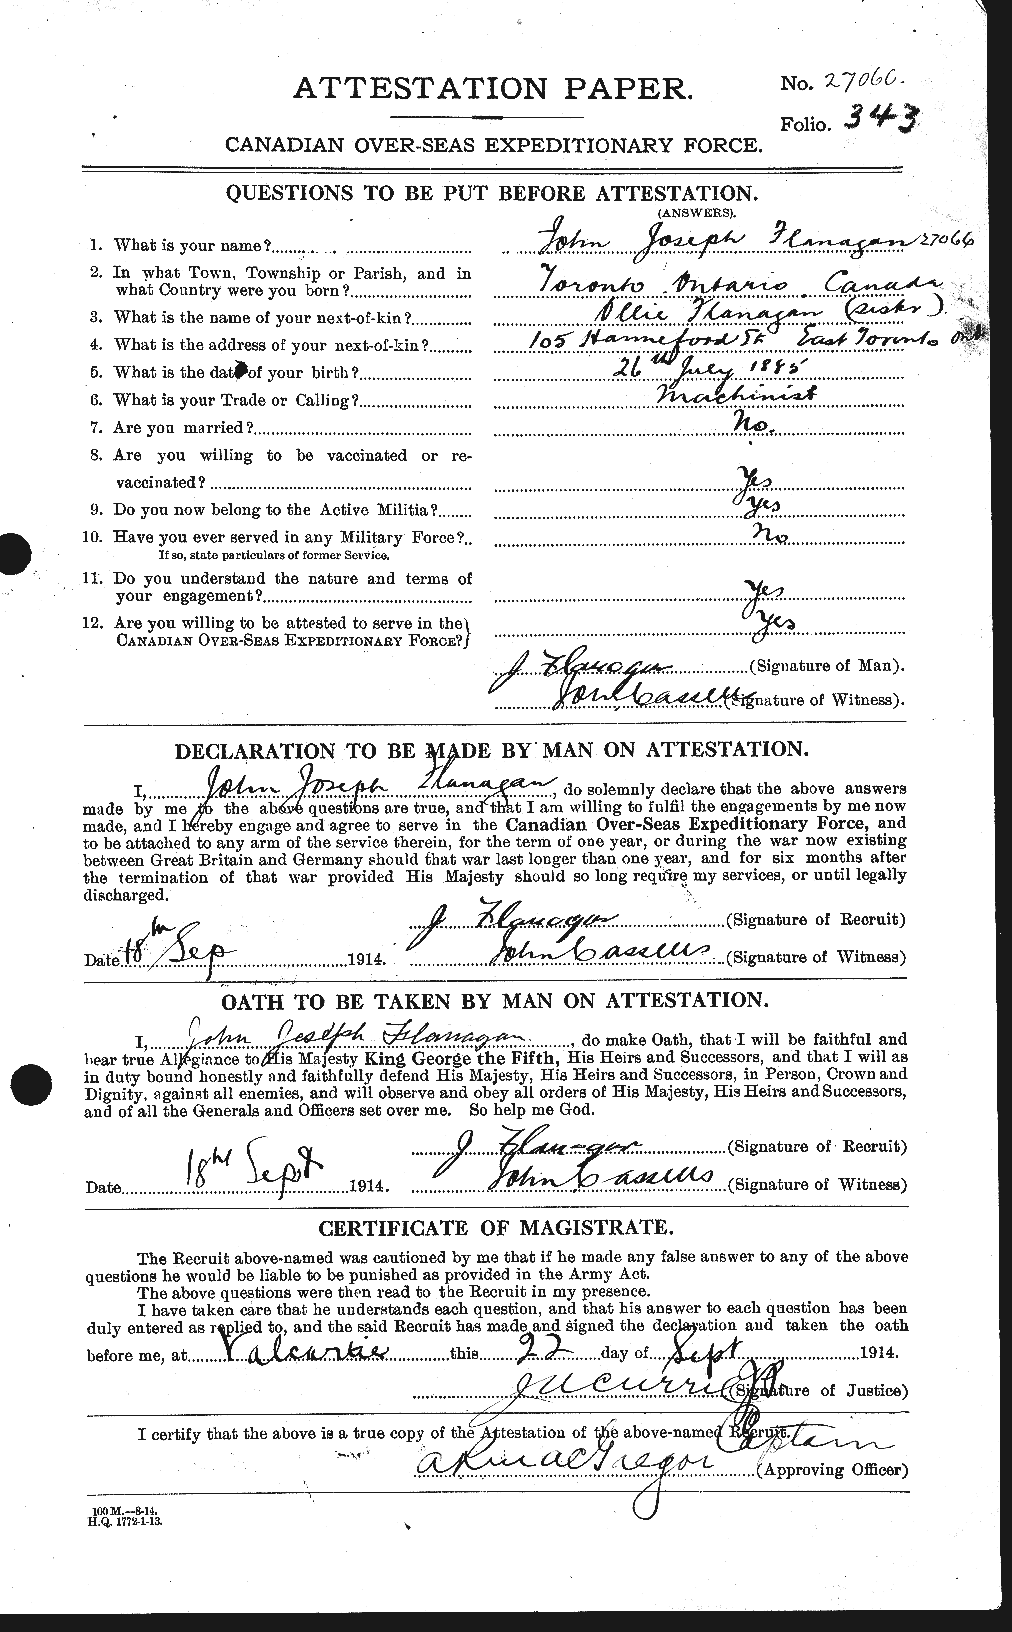 Personnel Records of the First World War - CEF 323477a